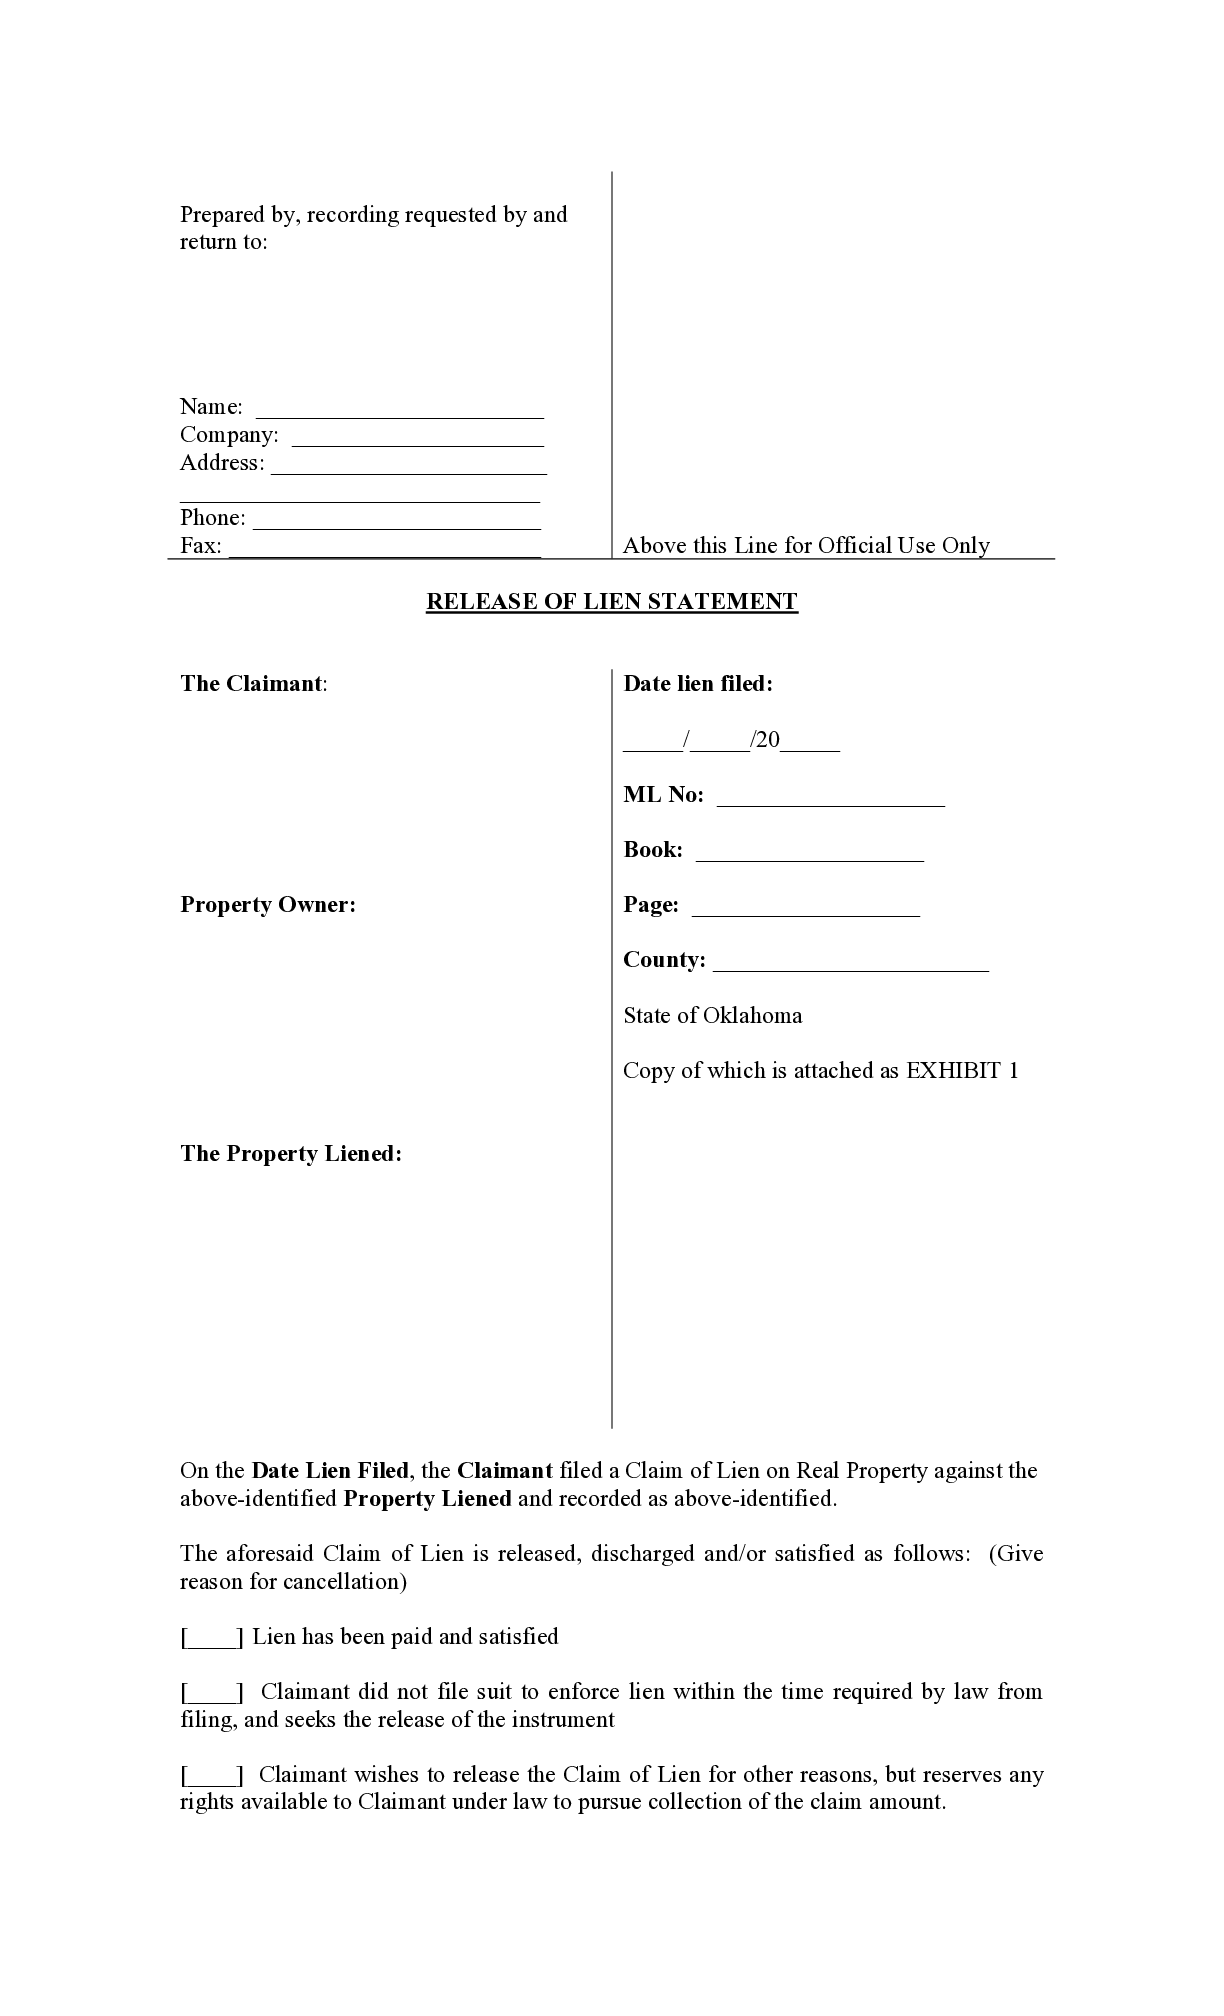 Oklahoma Mechanics Lien Release Form - free from